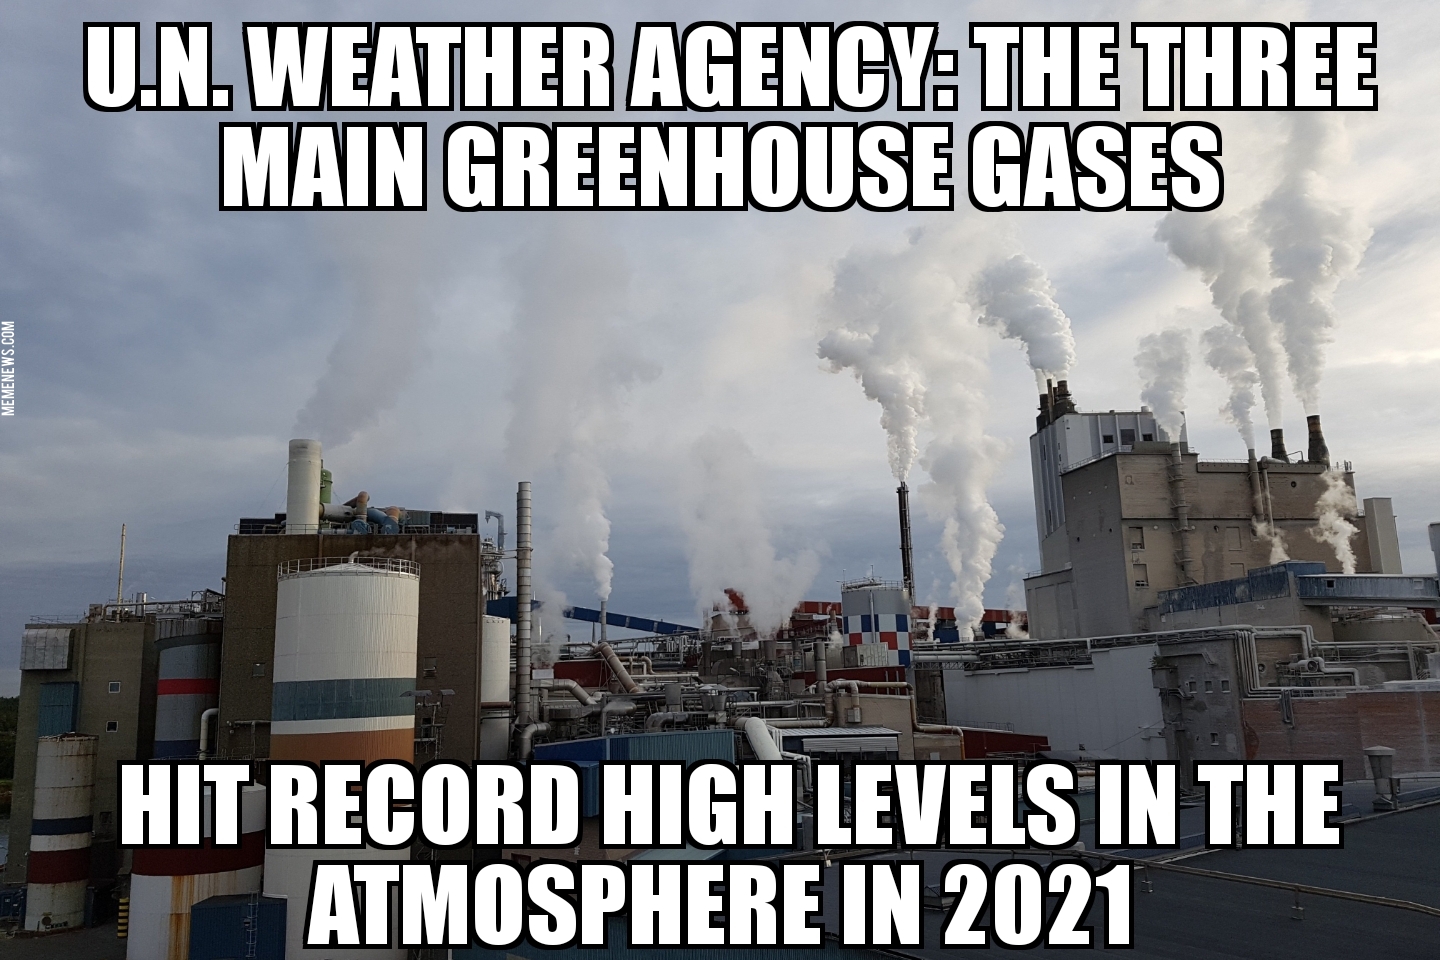 Greenhouse gases hit record high